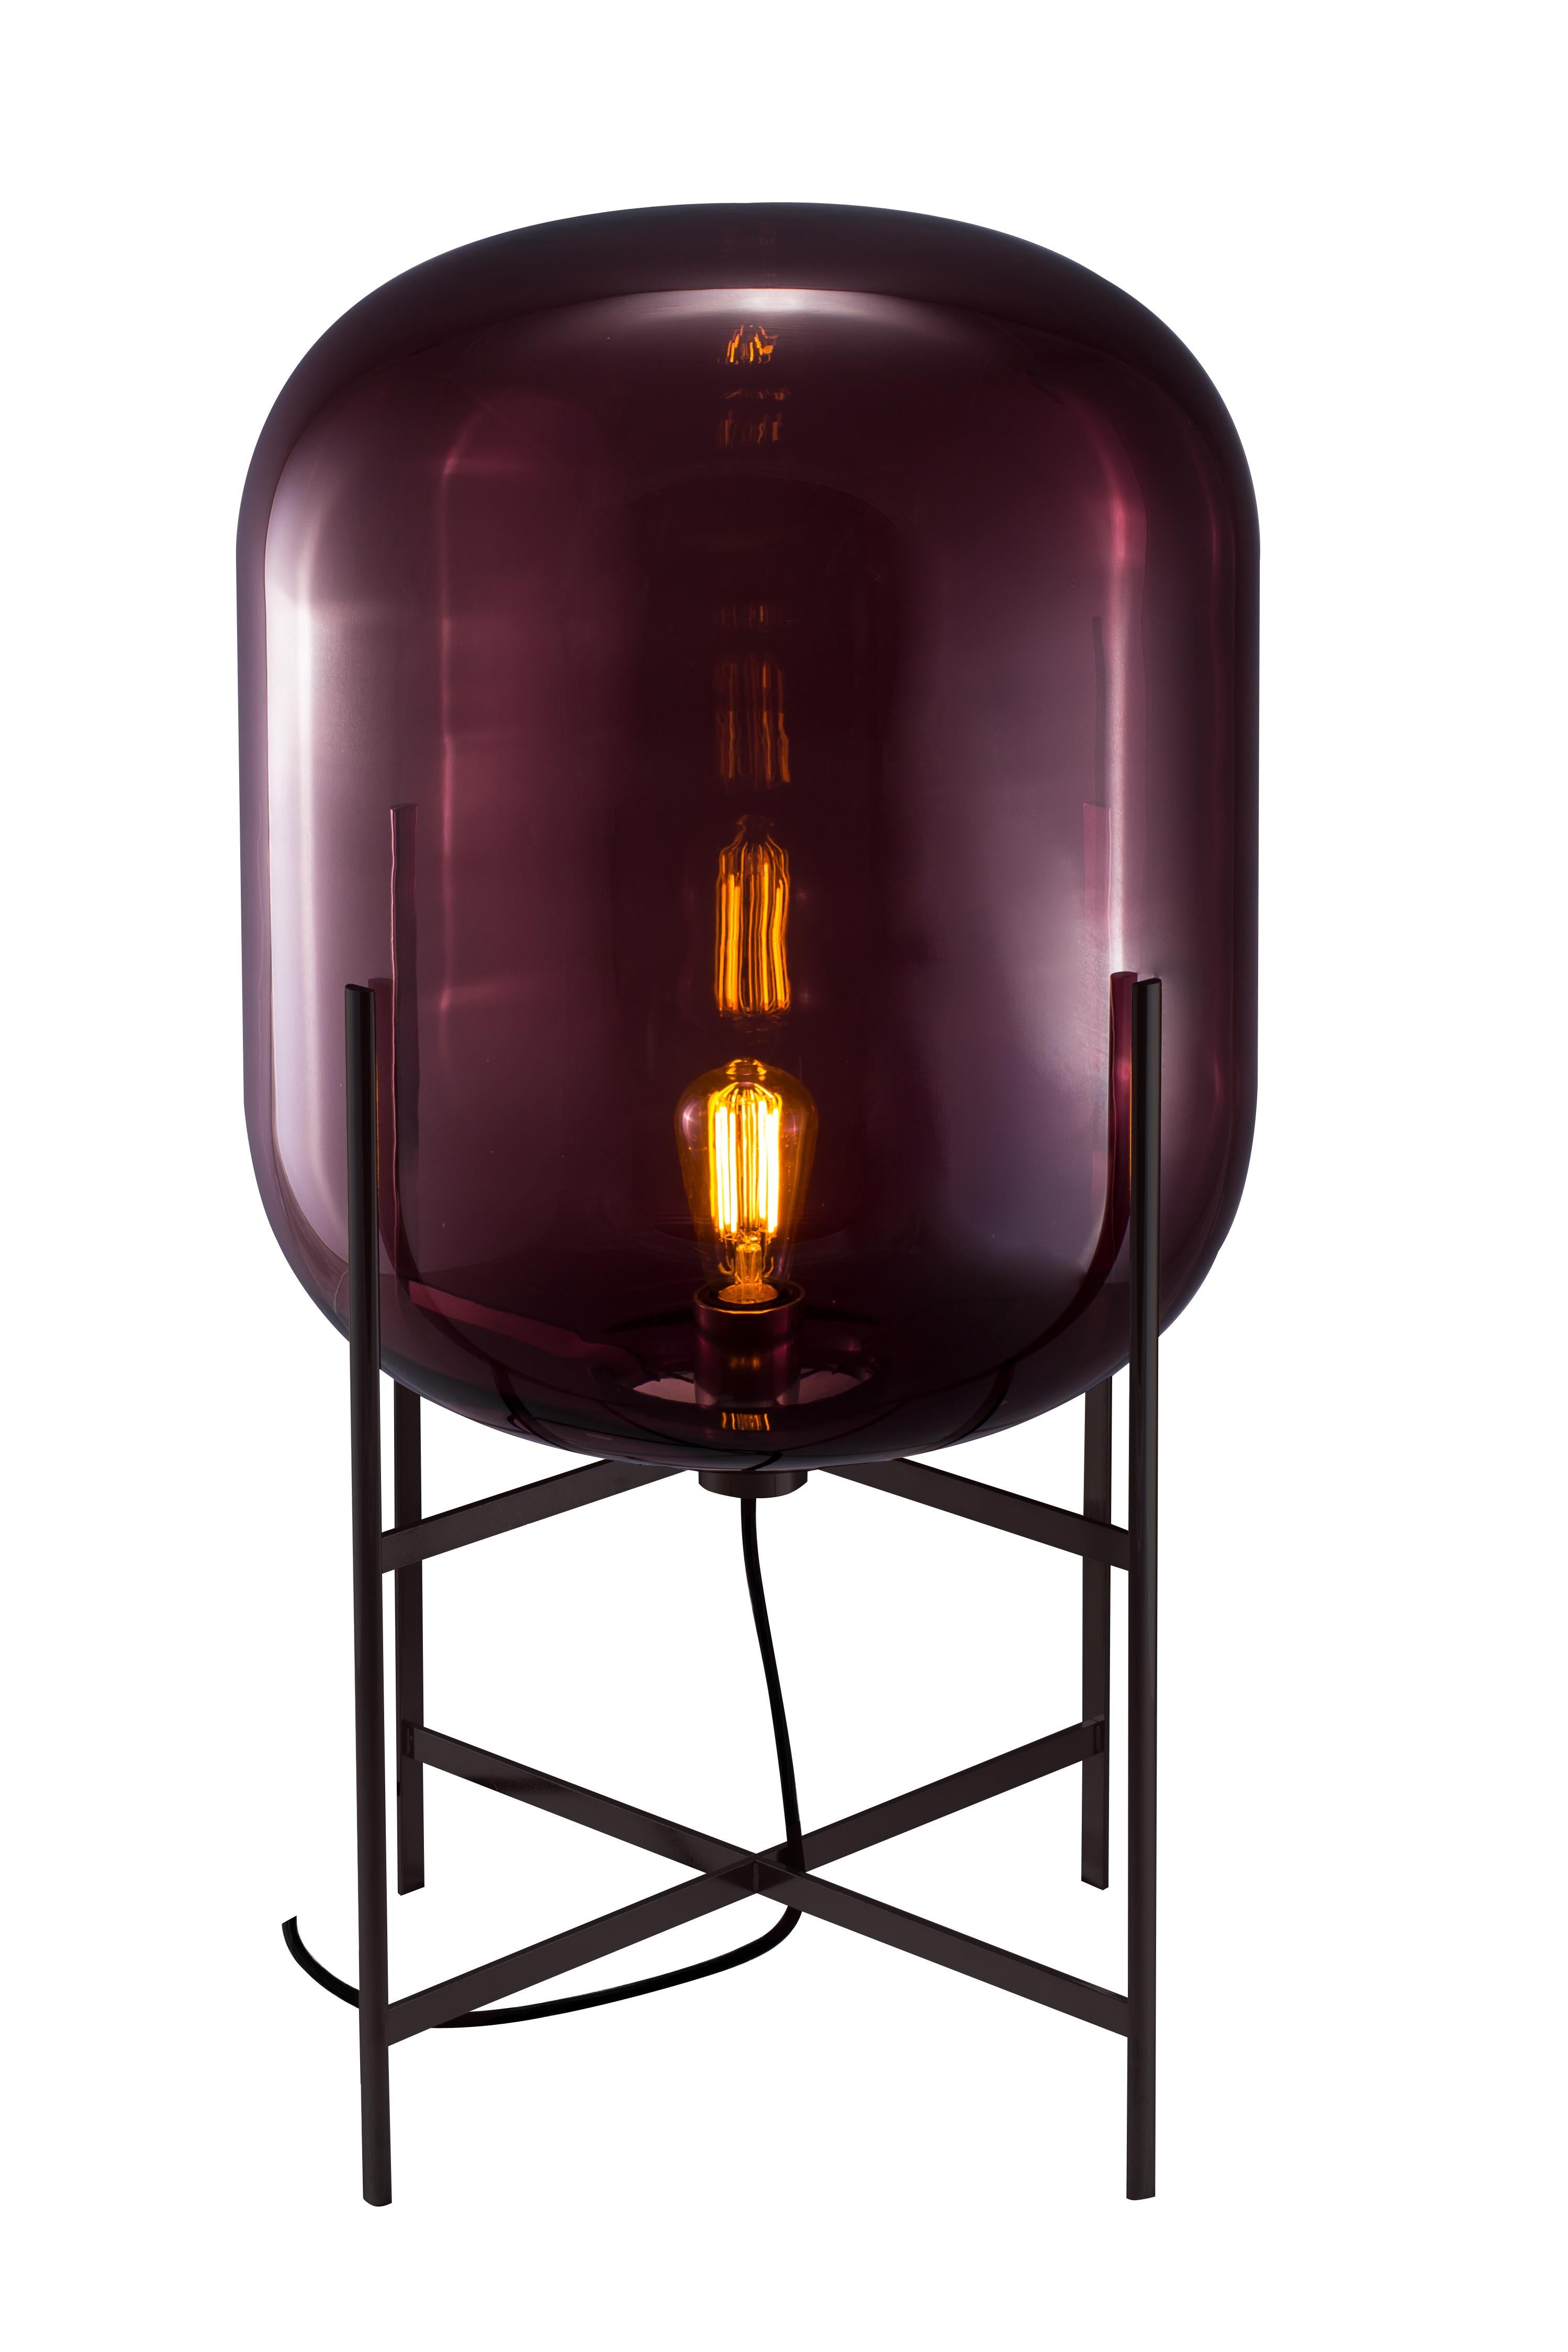 Oda Medium Aubergine Black Floor Lamp by Pulpo
Dimensions: D45 x H80 cm
Materials: handblown glass coloured and steel.

Also available in different finishes.

A slender base hugs a bulbous form. An industrial motif softened by the gentle